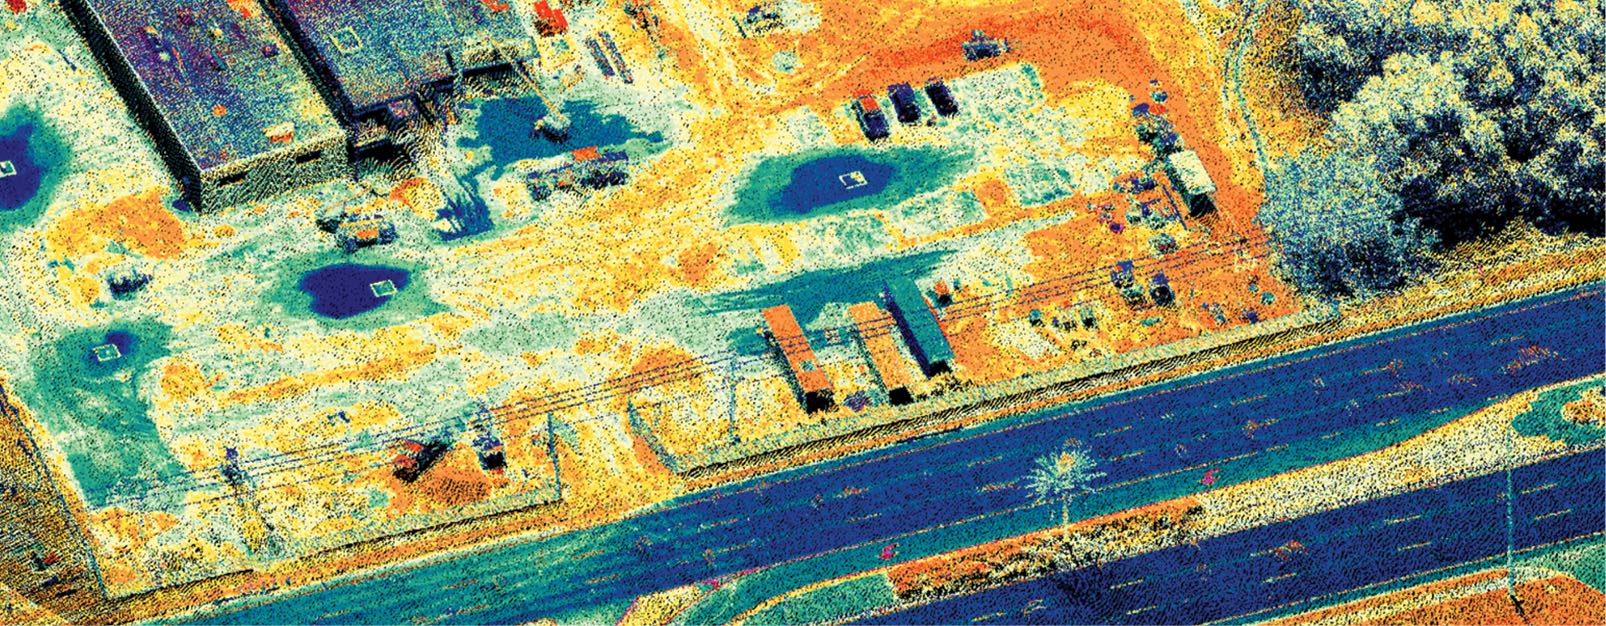 Moving Forward with LiDAR Inside Unmanned Systems